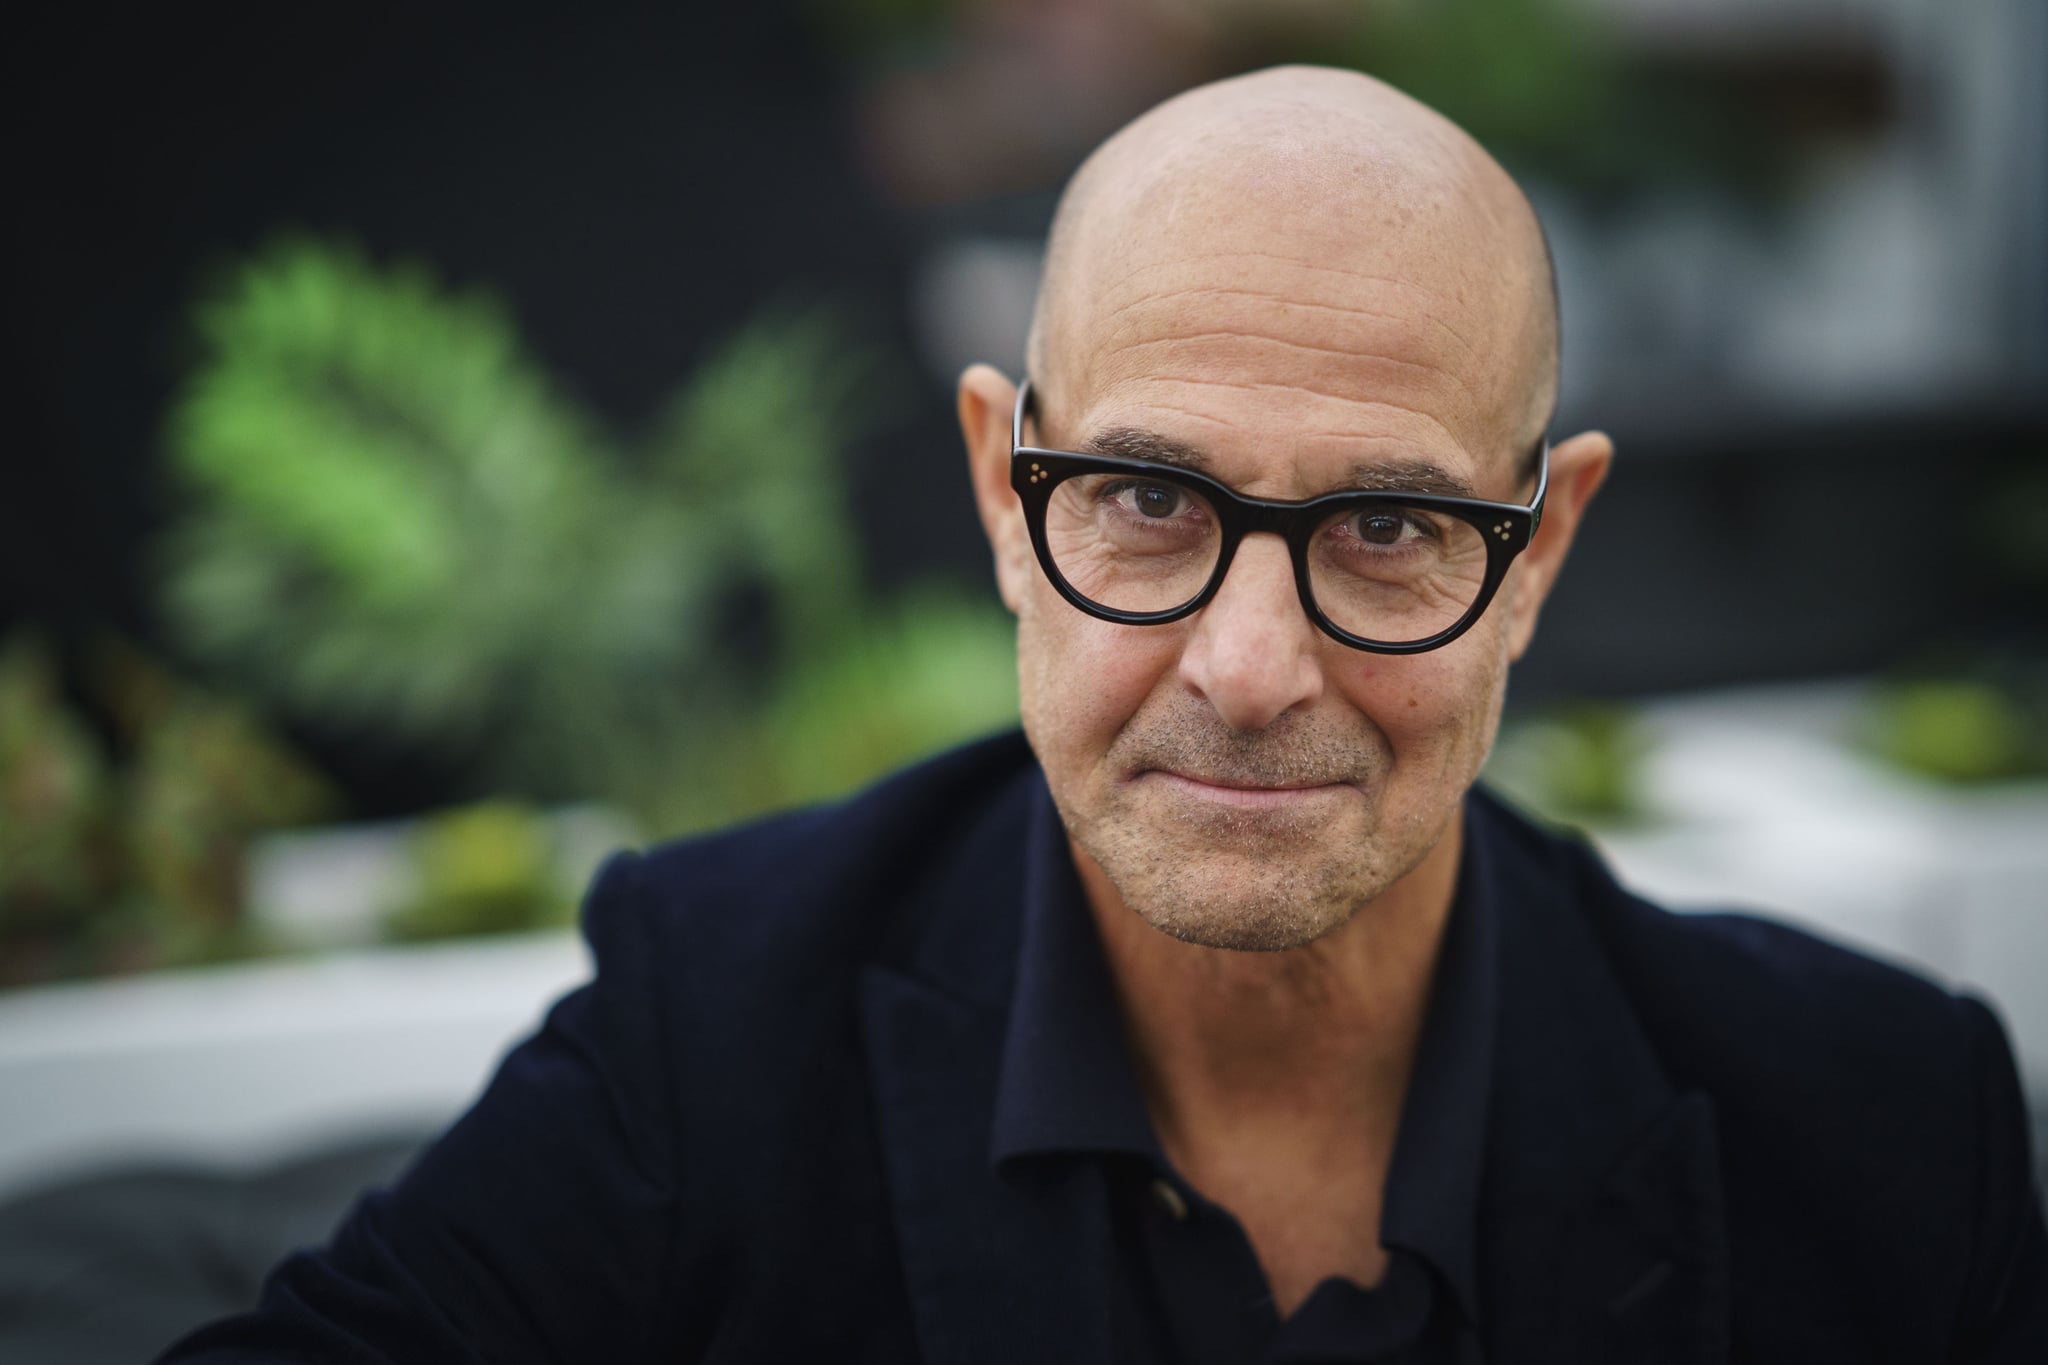 CHELTENHAM, ENGLAND - OCTOBER 7: Stanley Tucci, actor, at the Cheltenham Literature Festival on October 7, 2022 in Cheltenham, England. (Photo by David Levenson/Getty Images)